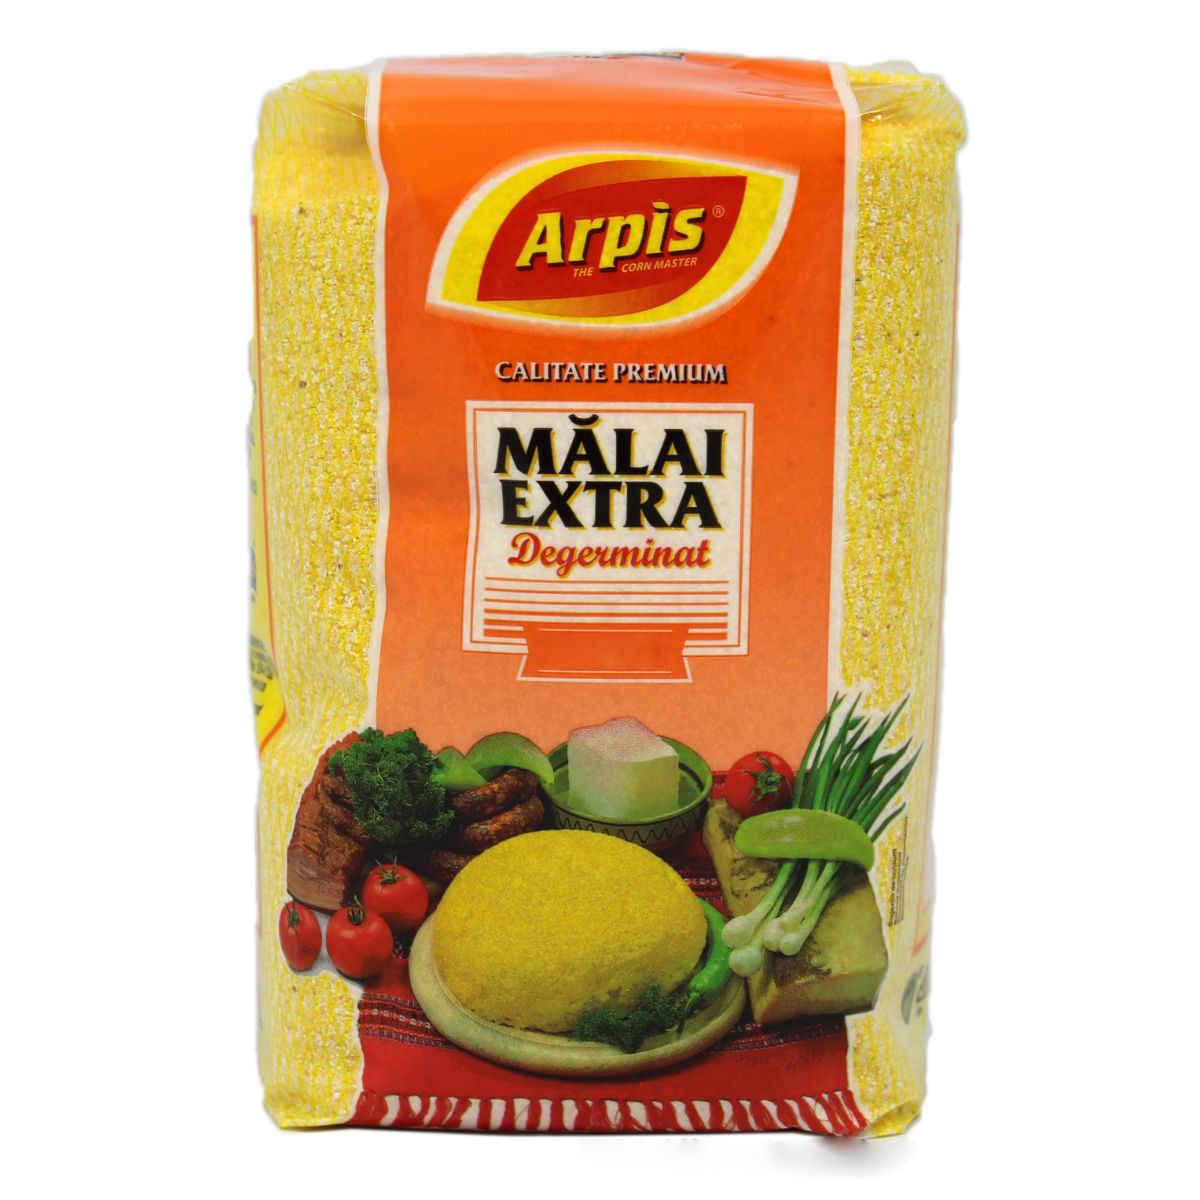 A package of Arpis - Malai Extra - 1kg cornmeal, featuring images of corn and vegetables on the label.